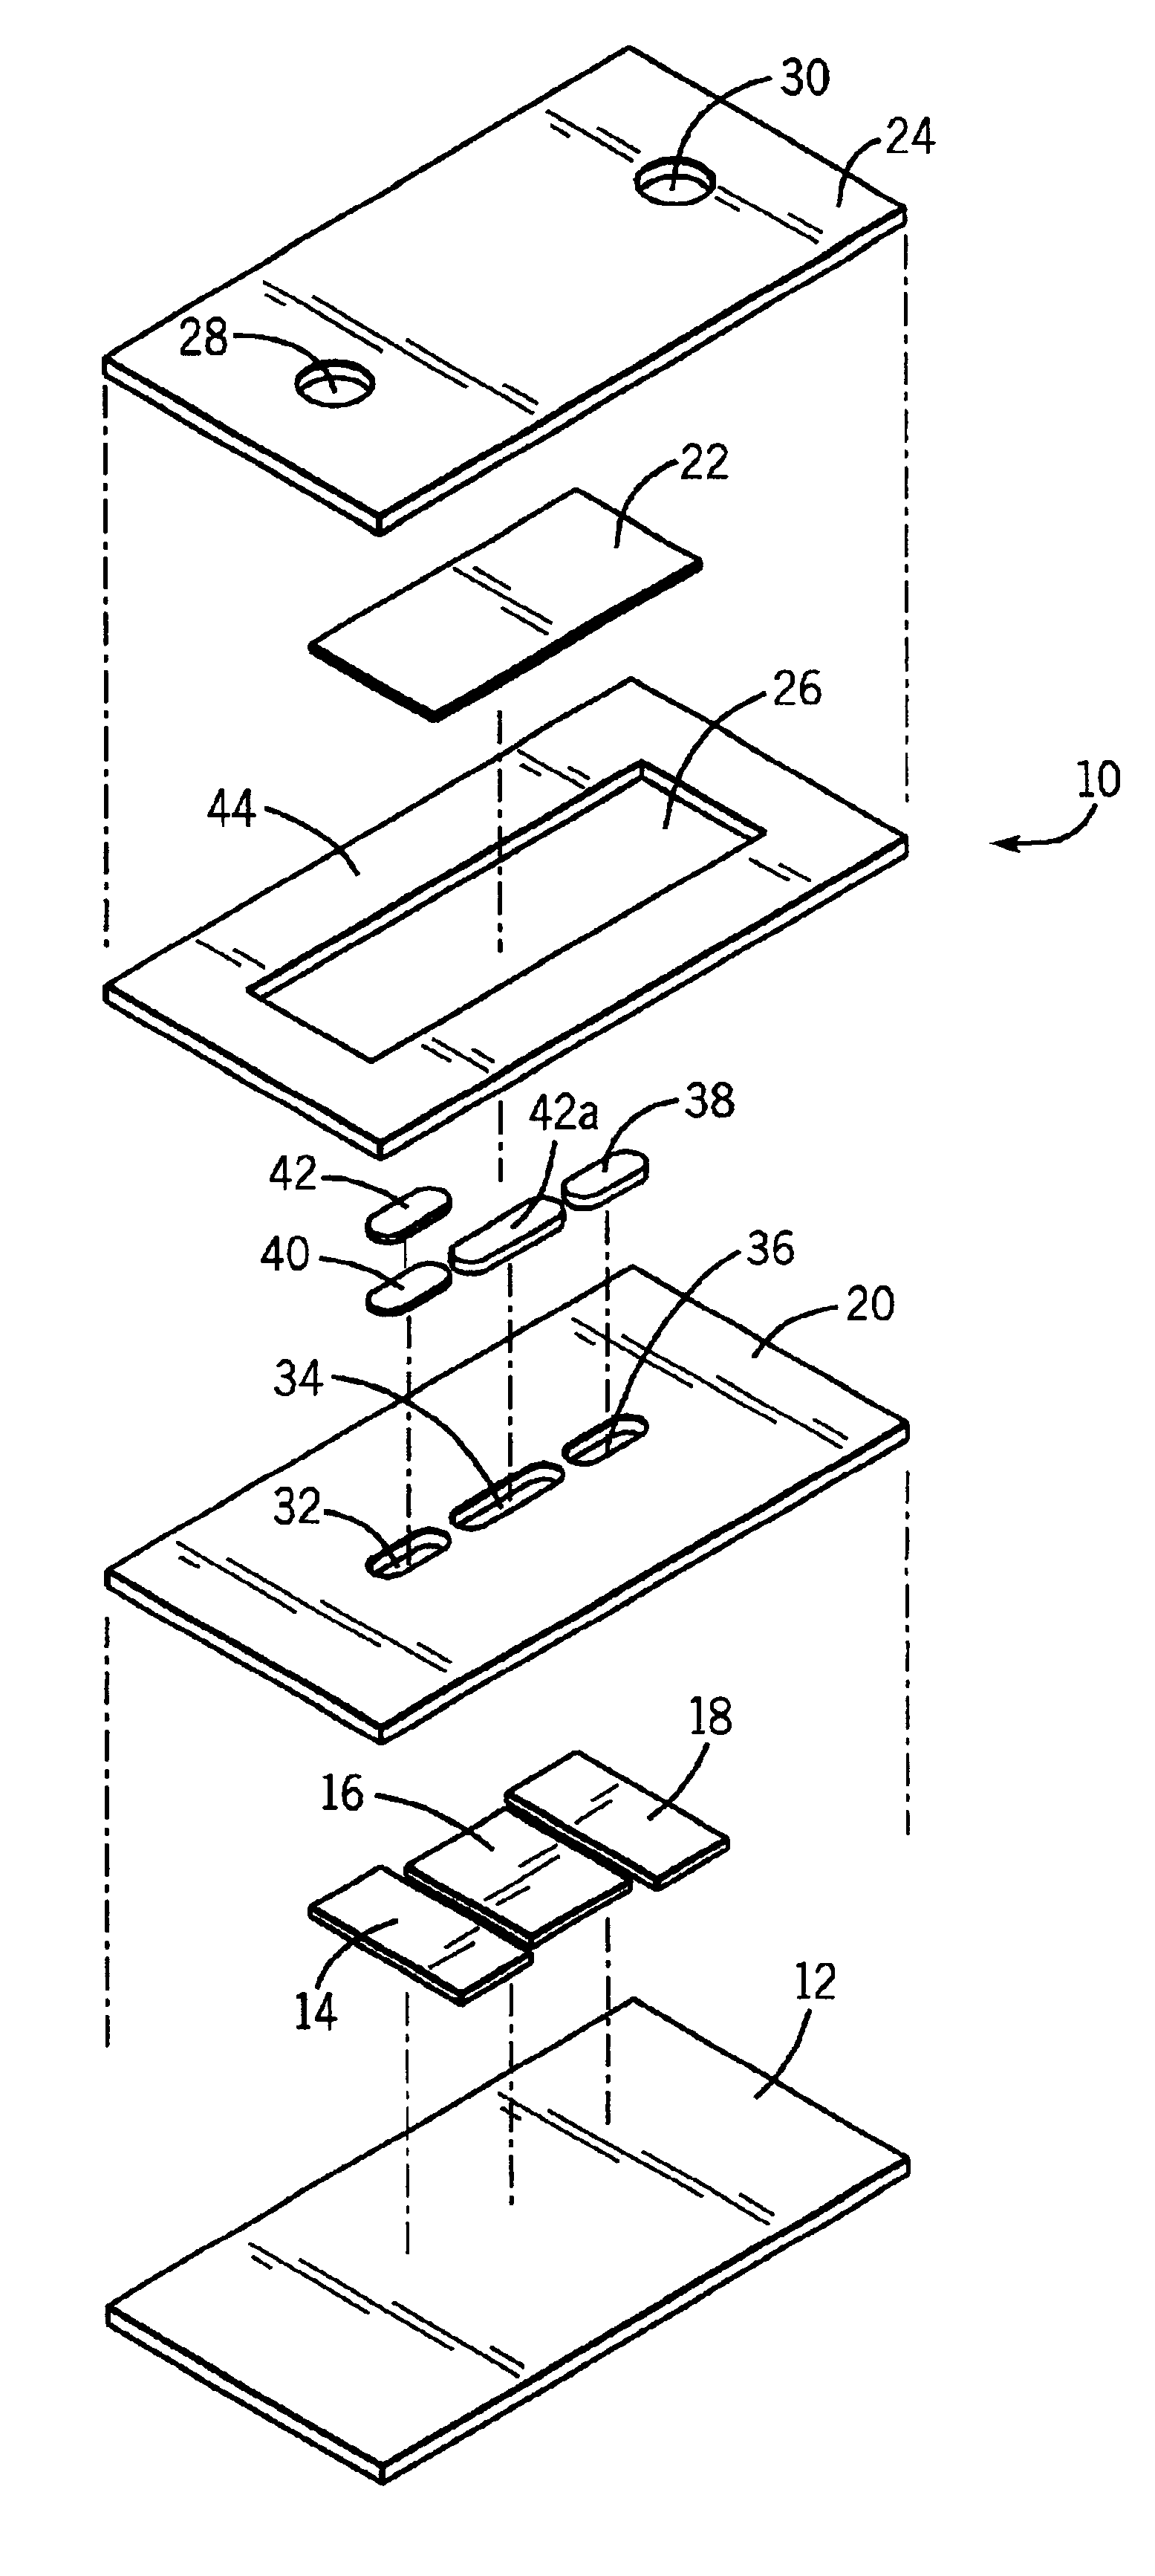 Sensor having electrode for determining the rate of flow of a fluid